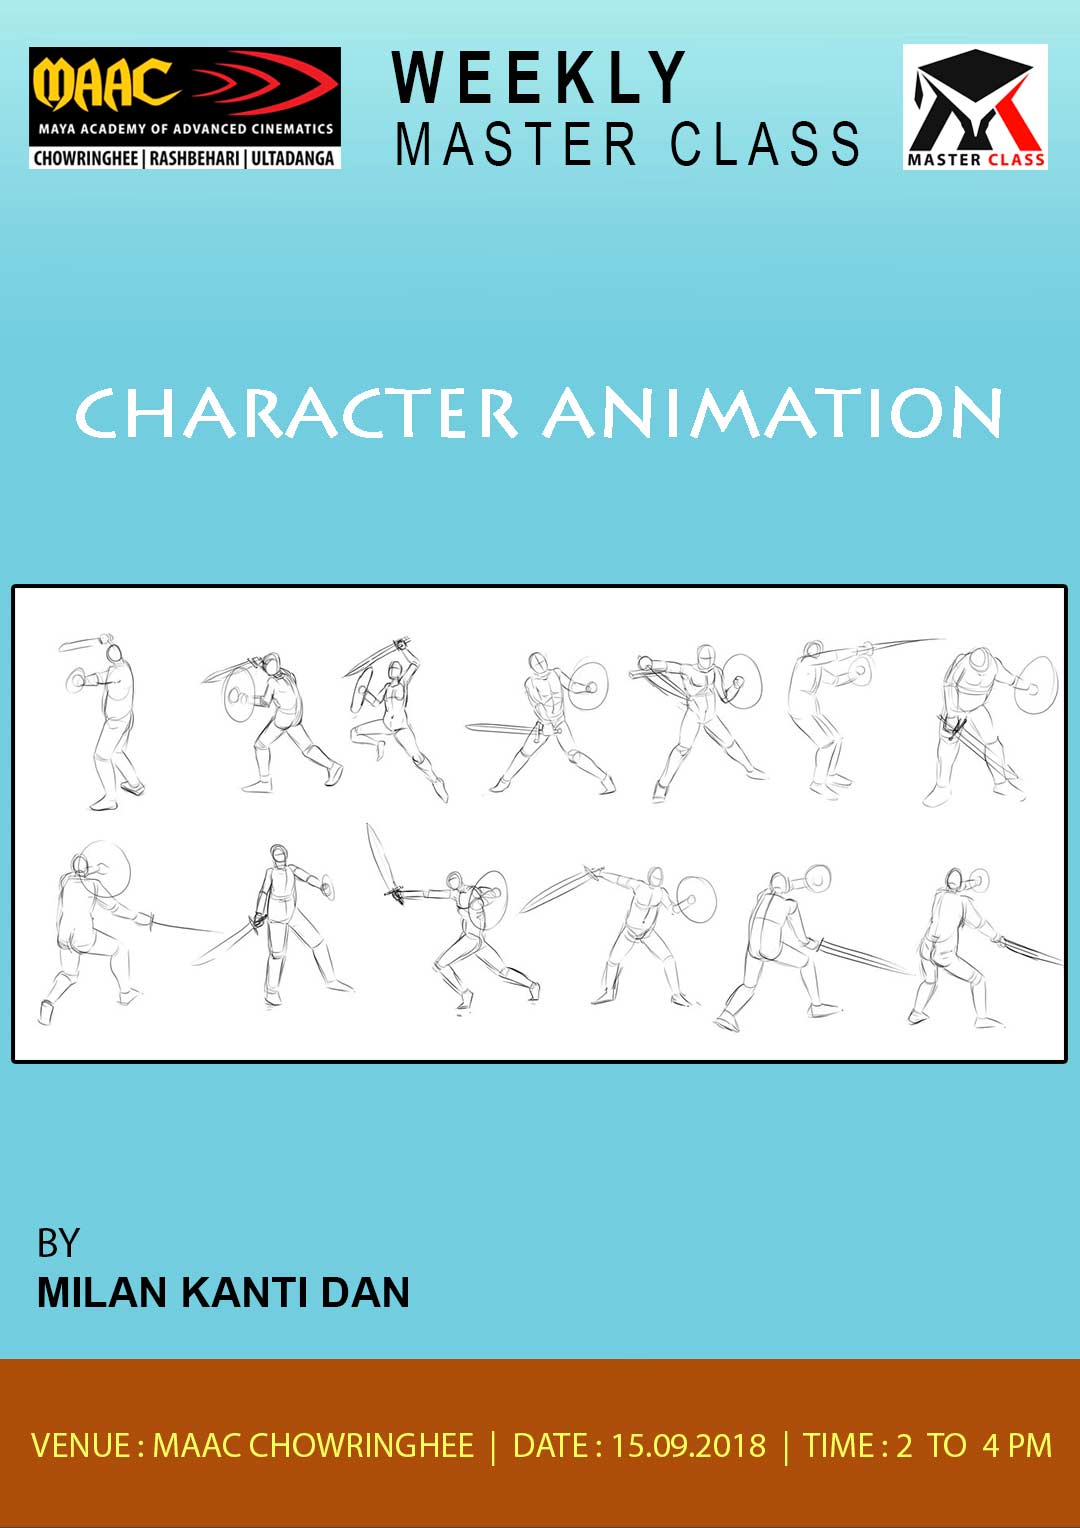 Weekly Master Class on Character Animation